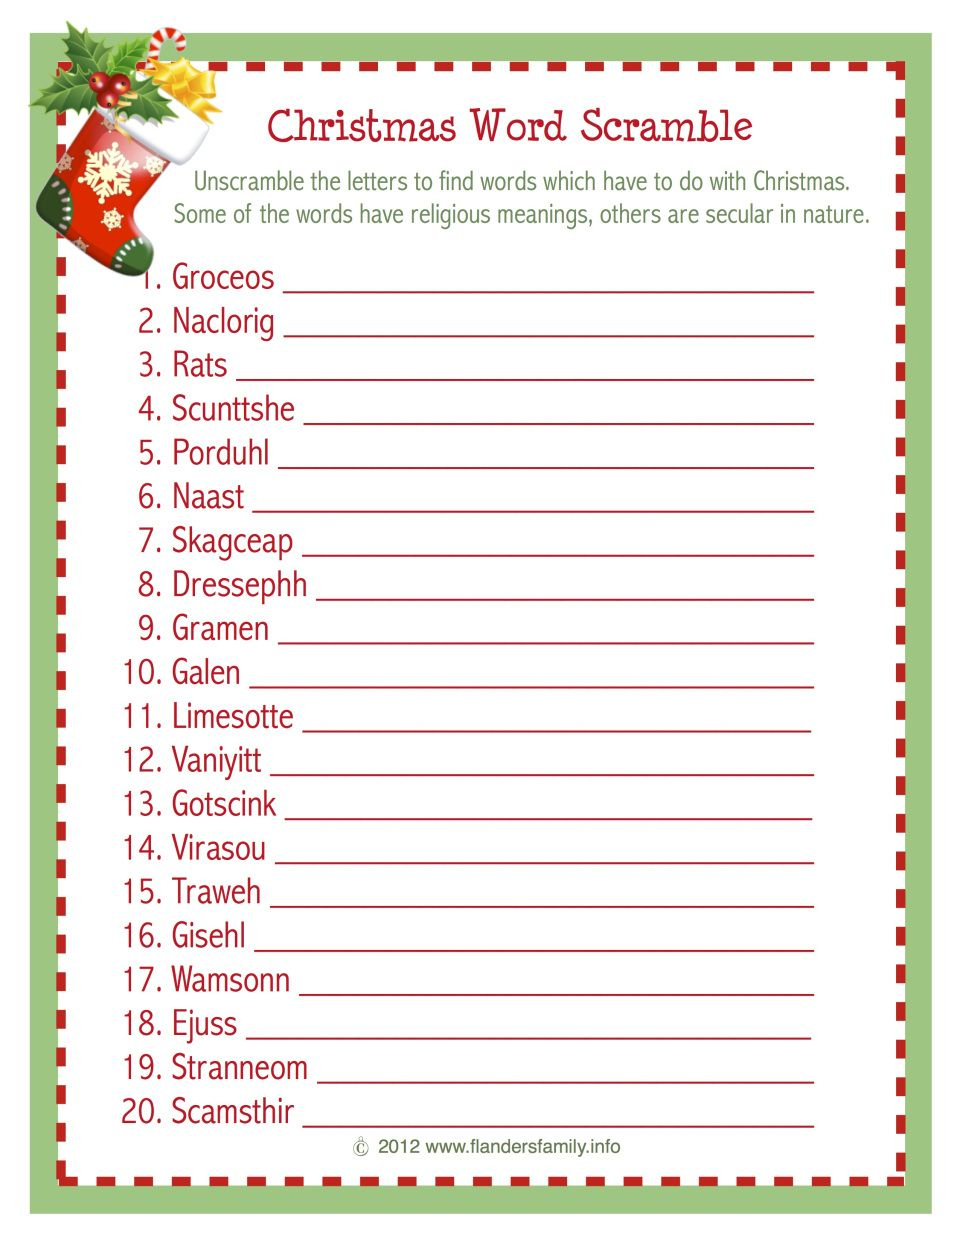 8 Games For Your Christmas Celebration | Christmas Party Games - Free Printable Christmas Word Games For Adults